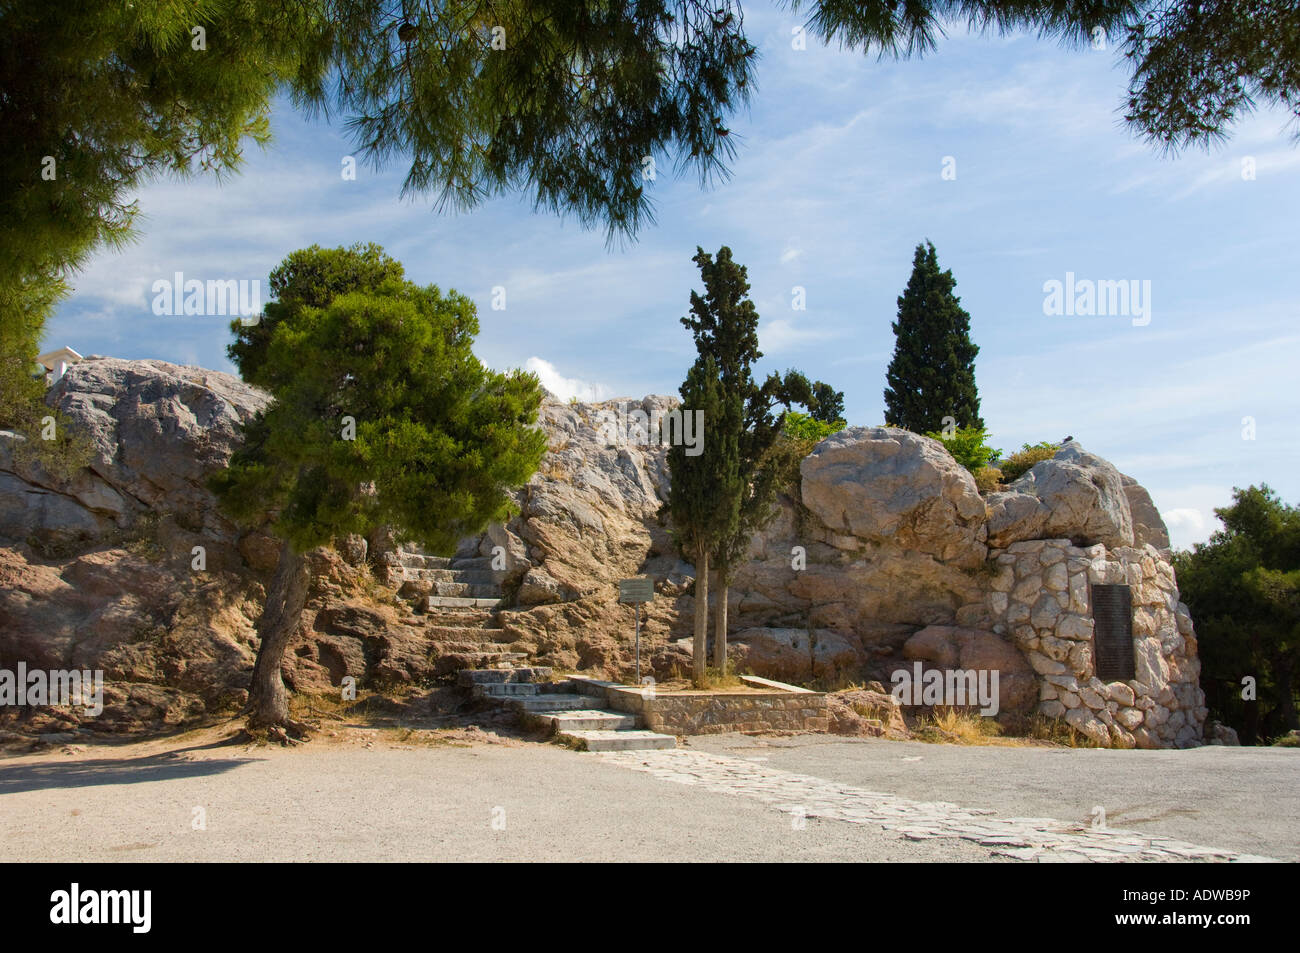 Mars Hill or the Areopagus near the Acropolis in Athens Greece Stock Photo